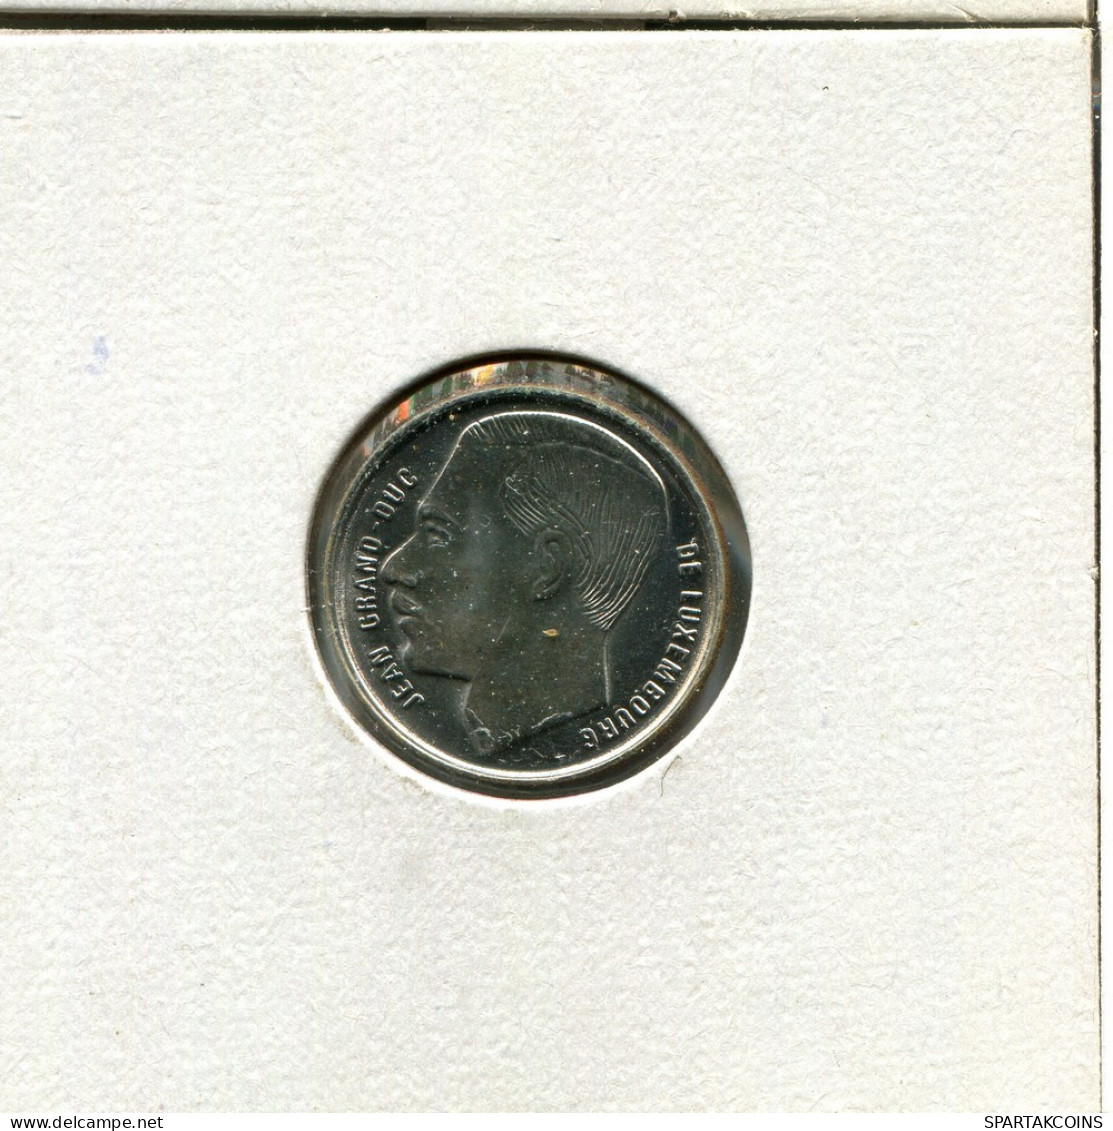 1 FRANC 1990 LUXEMBOURG Coin #AT225.U.A - Luxembourg